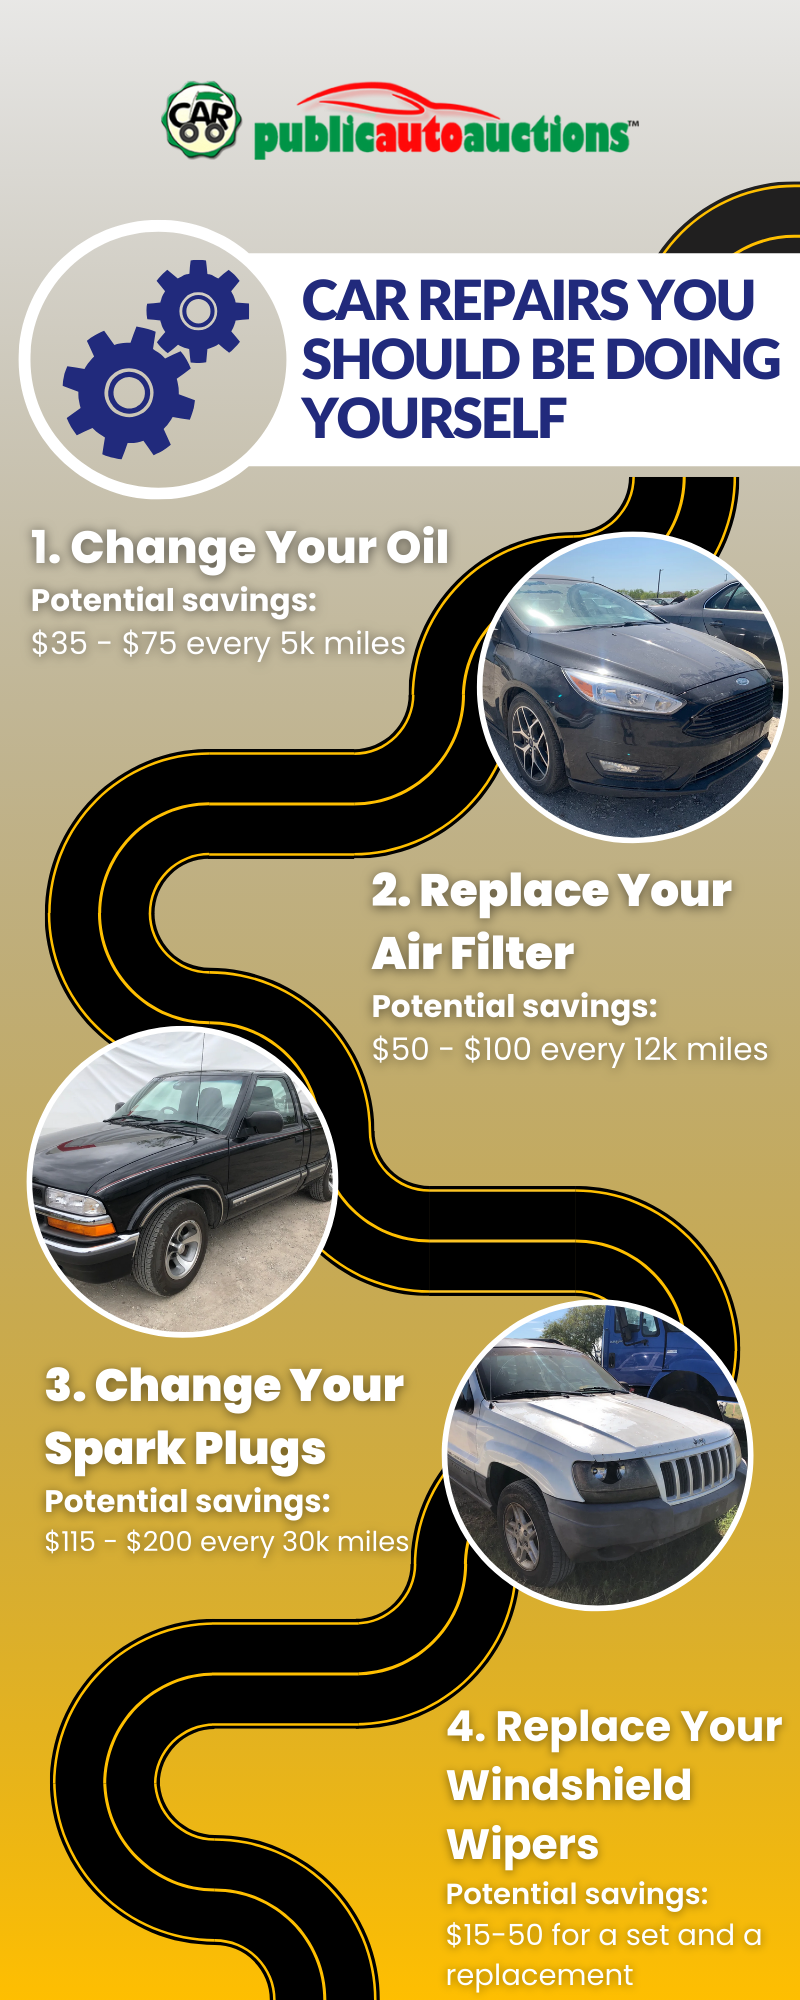 Easy car repairs in an infographic you'll remember.